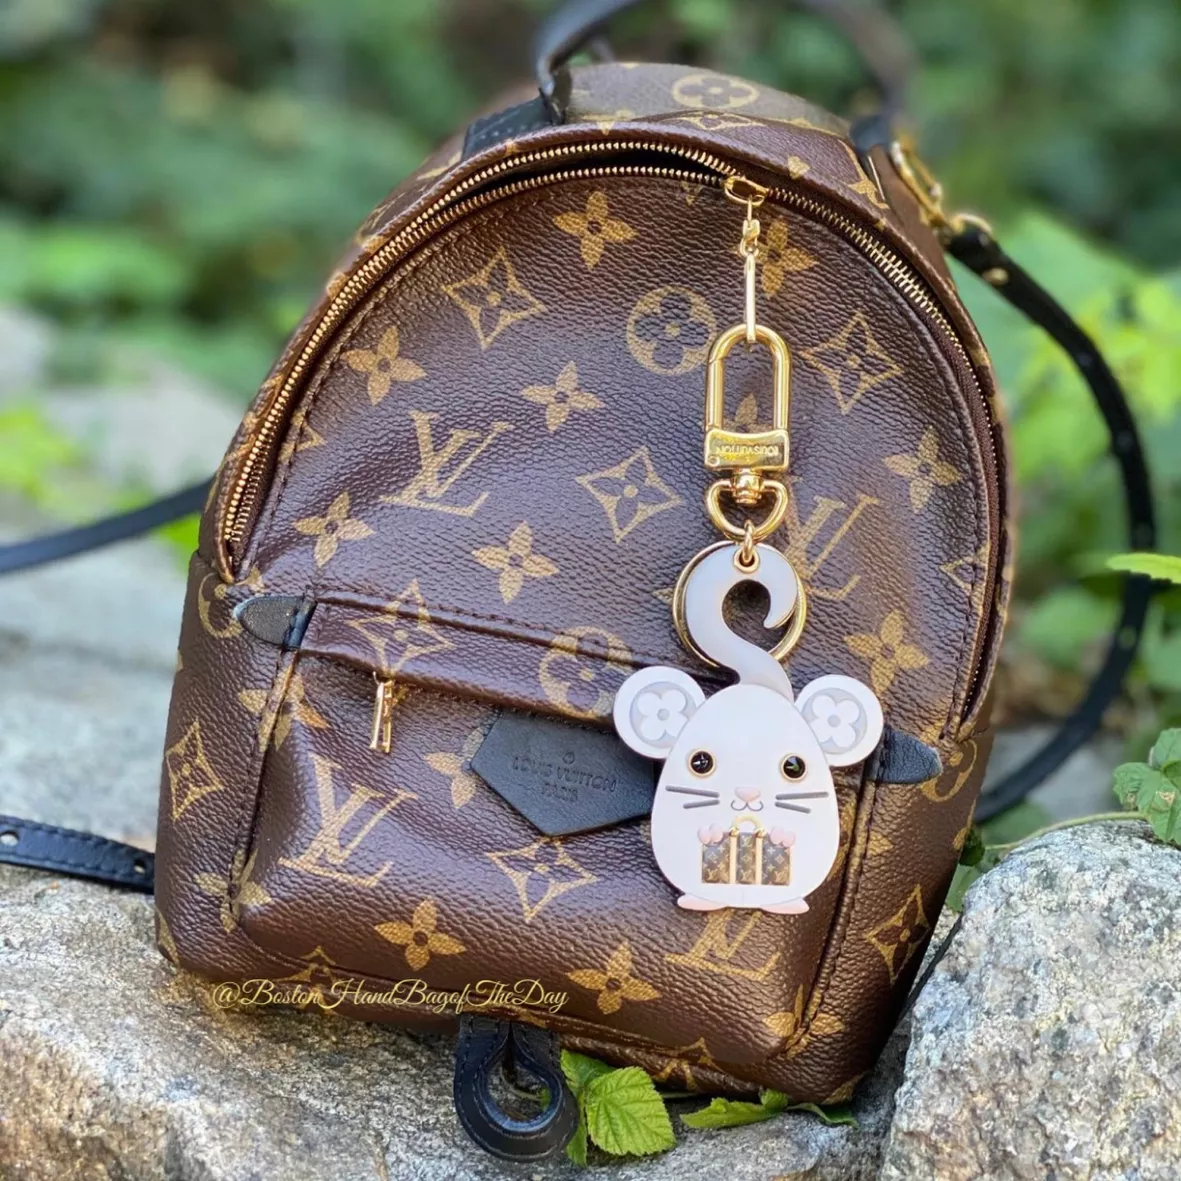 Which Lv palm spring backpack is real? #LOUISVUITTON